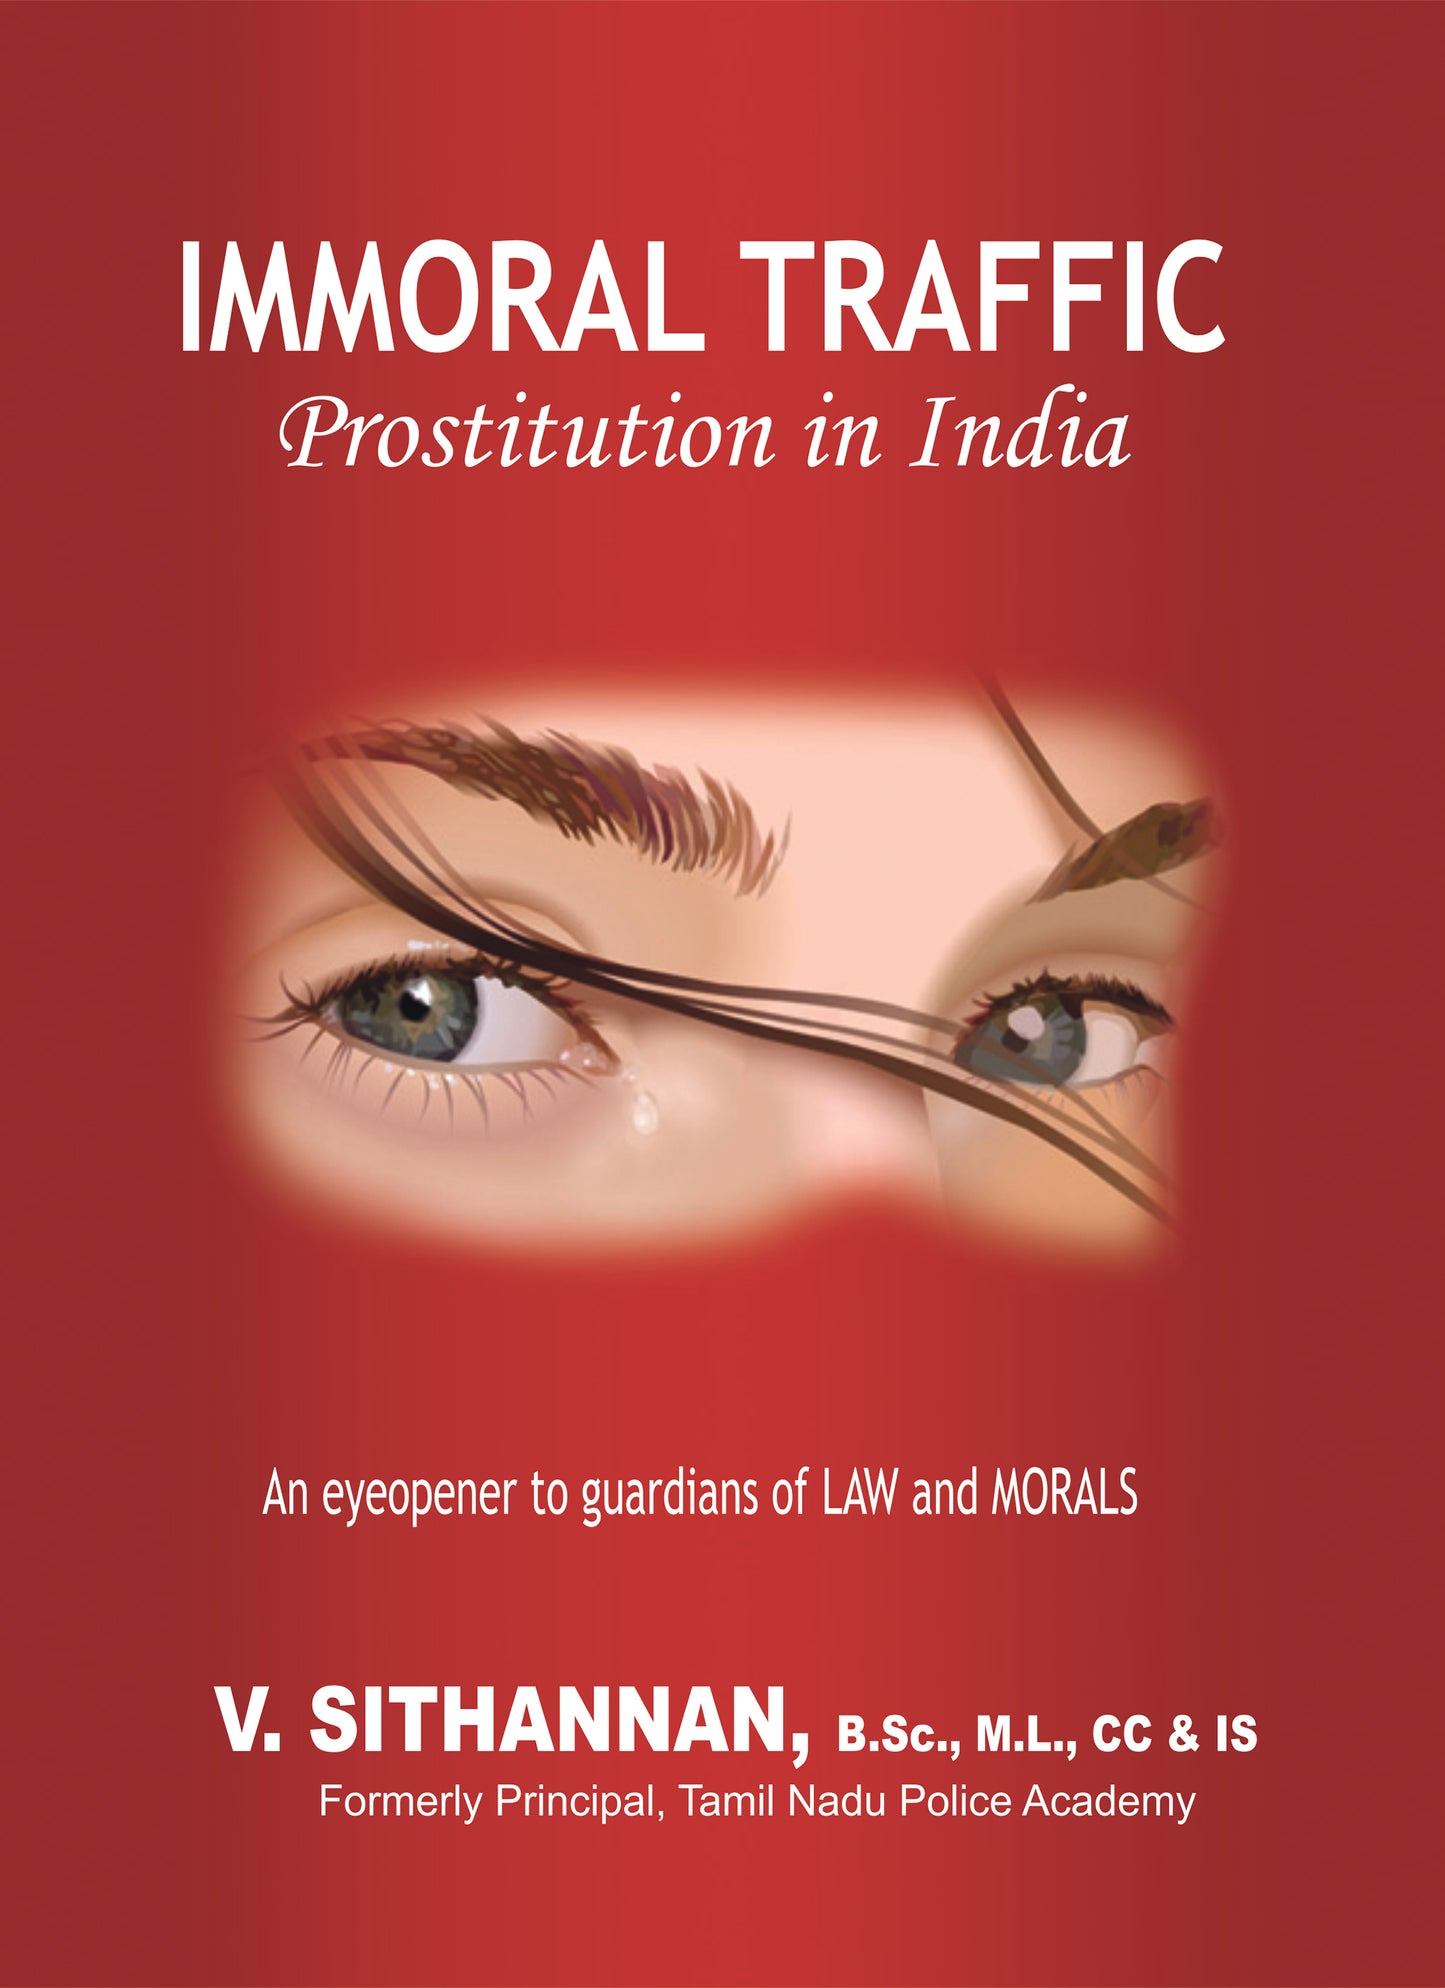 Immoral Traffic - Prostitution in India